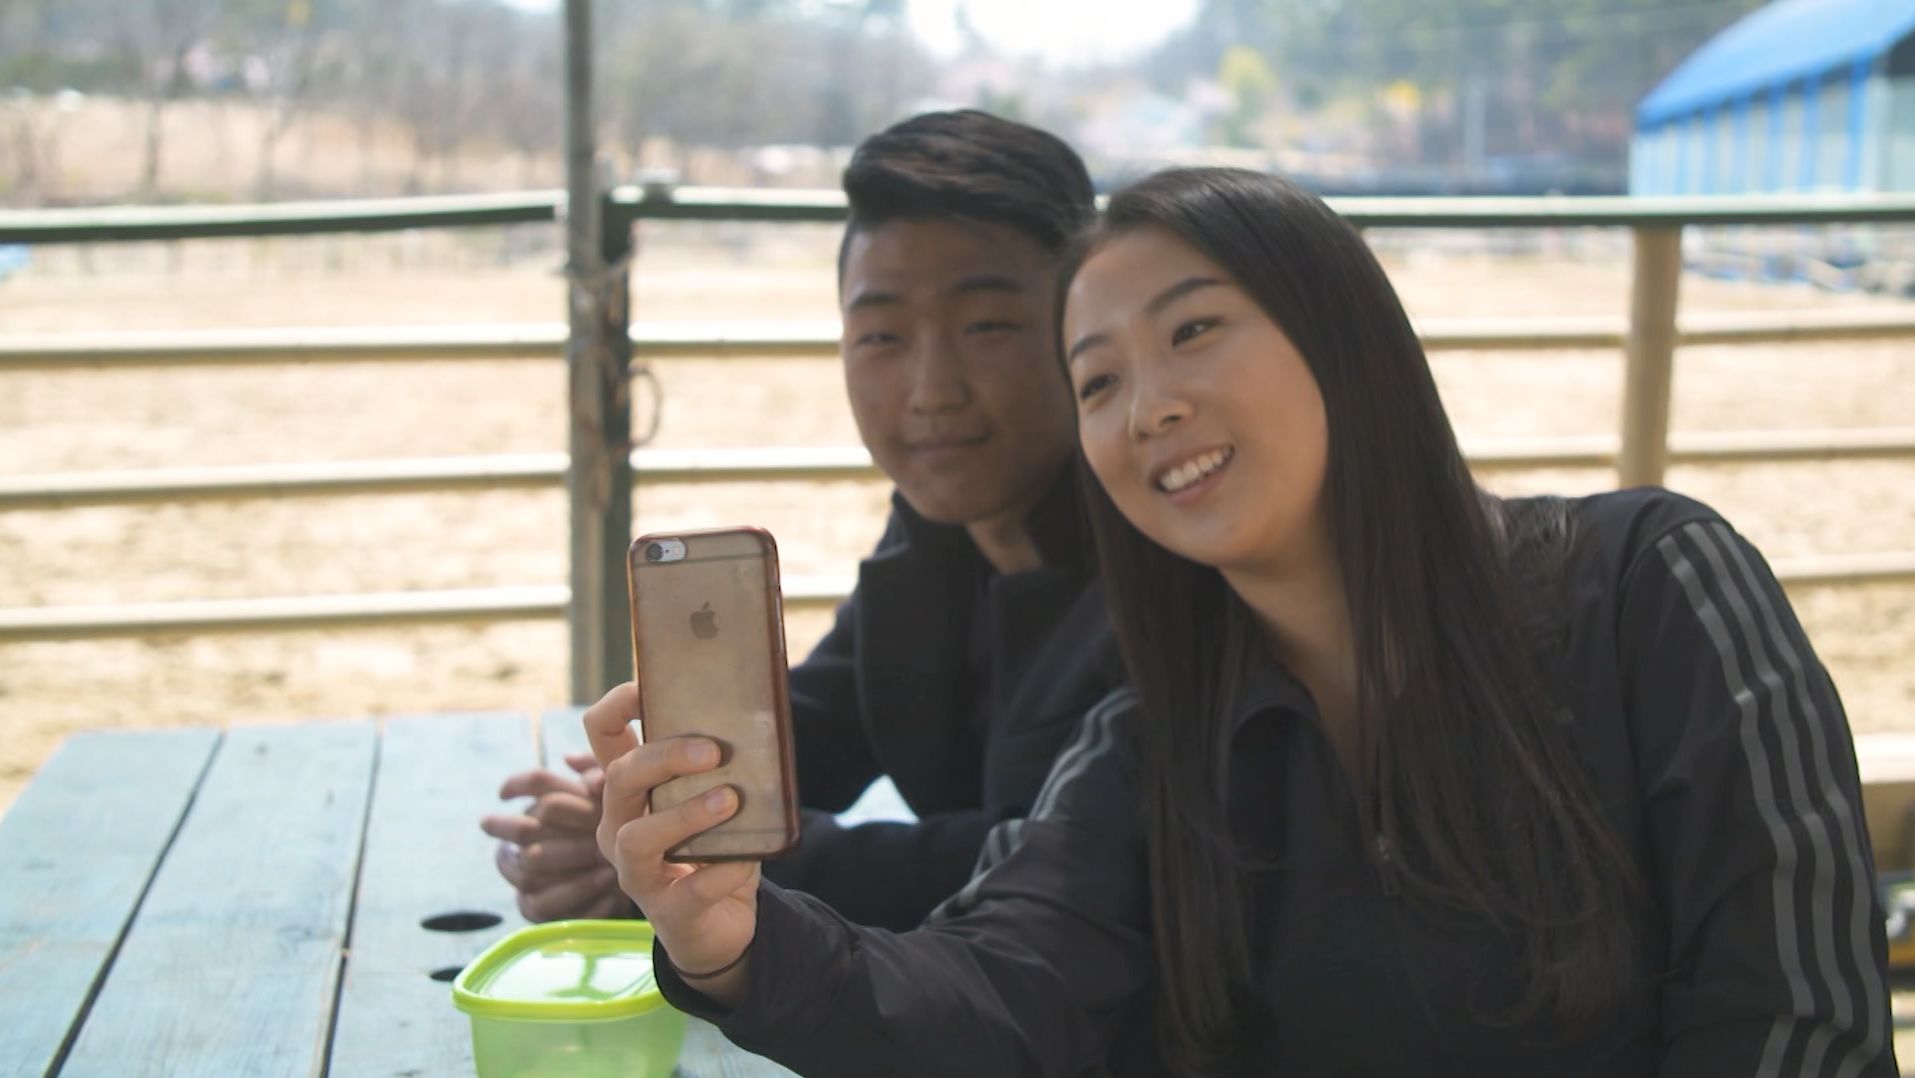 Korean High School - Why young South Koreans aren't interested in dating | CNN